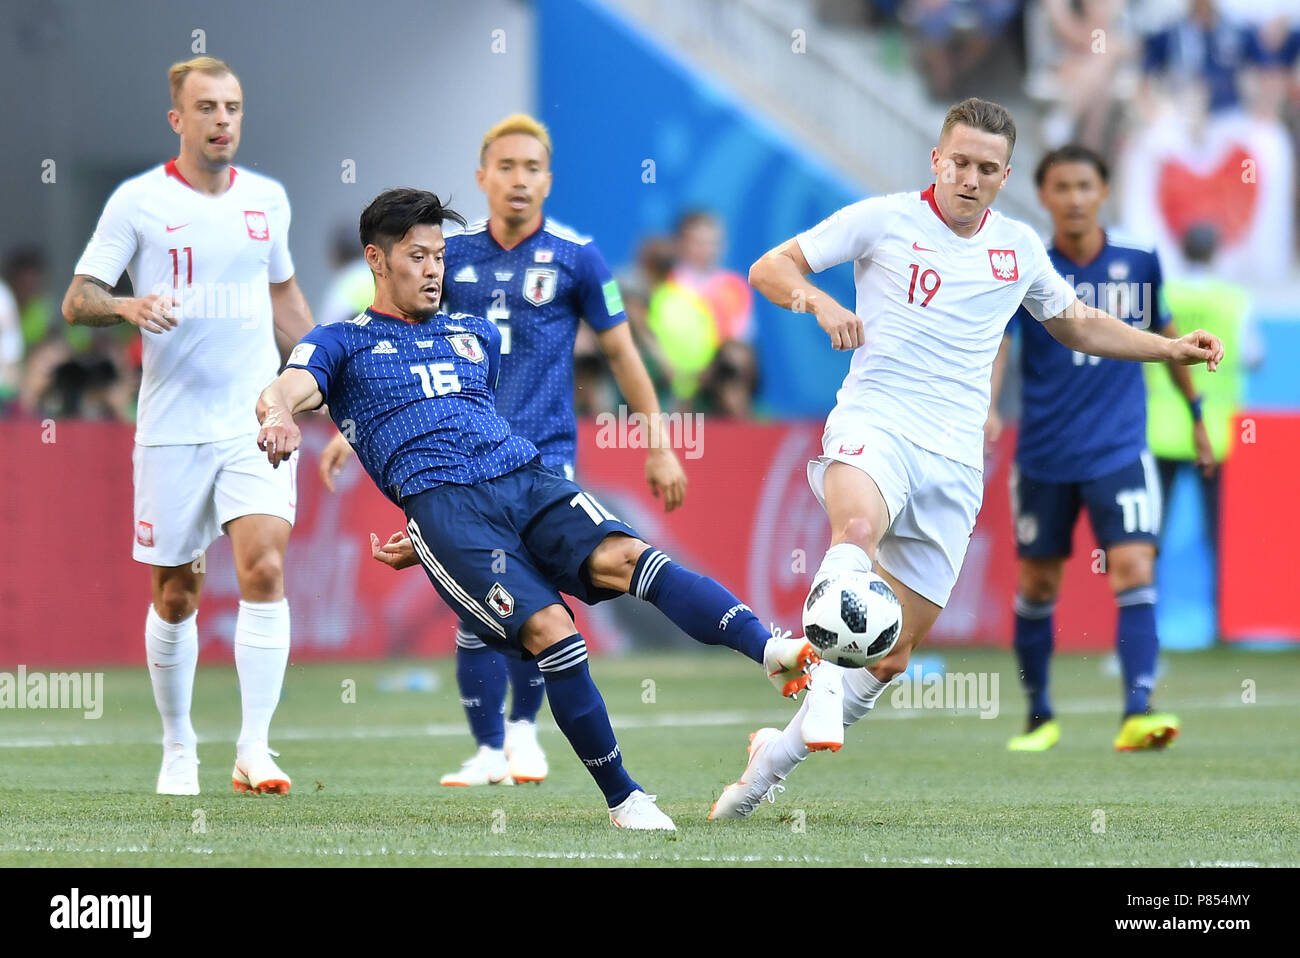 VOLGOGRAD, RUSSIA - JUNE 28: Hotaru Yamaguchi of Japan competes with Piotr Zielinski of Poland during the 2018 FIFA World Cup Russia group H match between Japan and Poland at Volgograd Arena on June 28, 2018 in Volgograd, Russia. (Photo by Lukasz Laskowski/PressFocus/MB Media/) Stock Photo